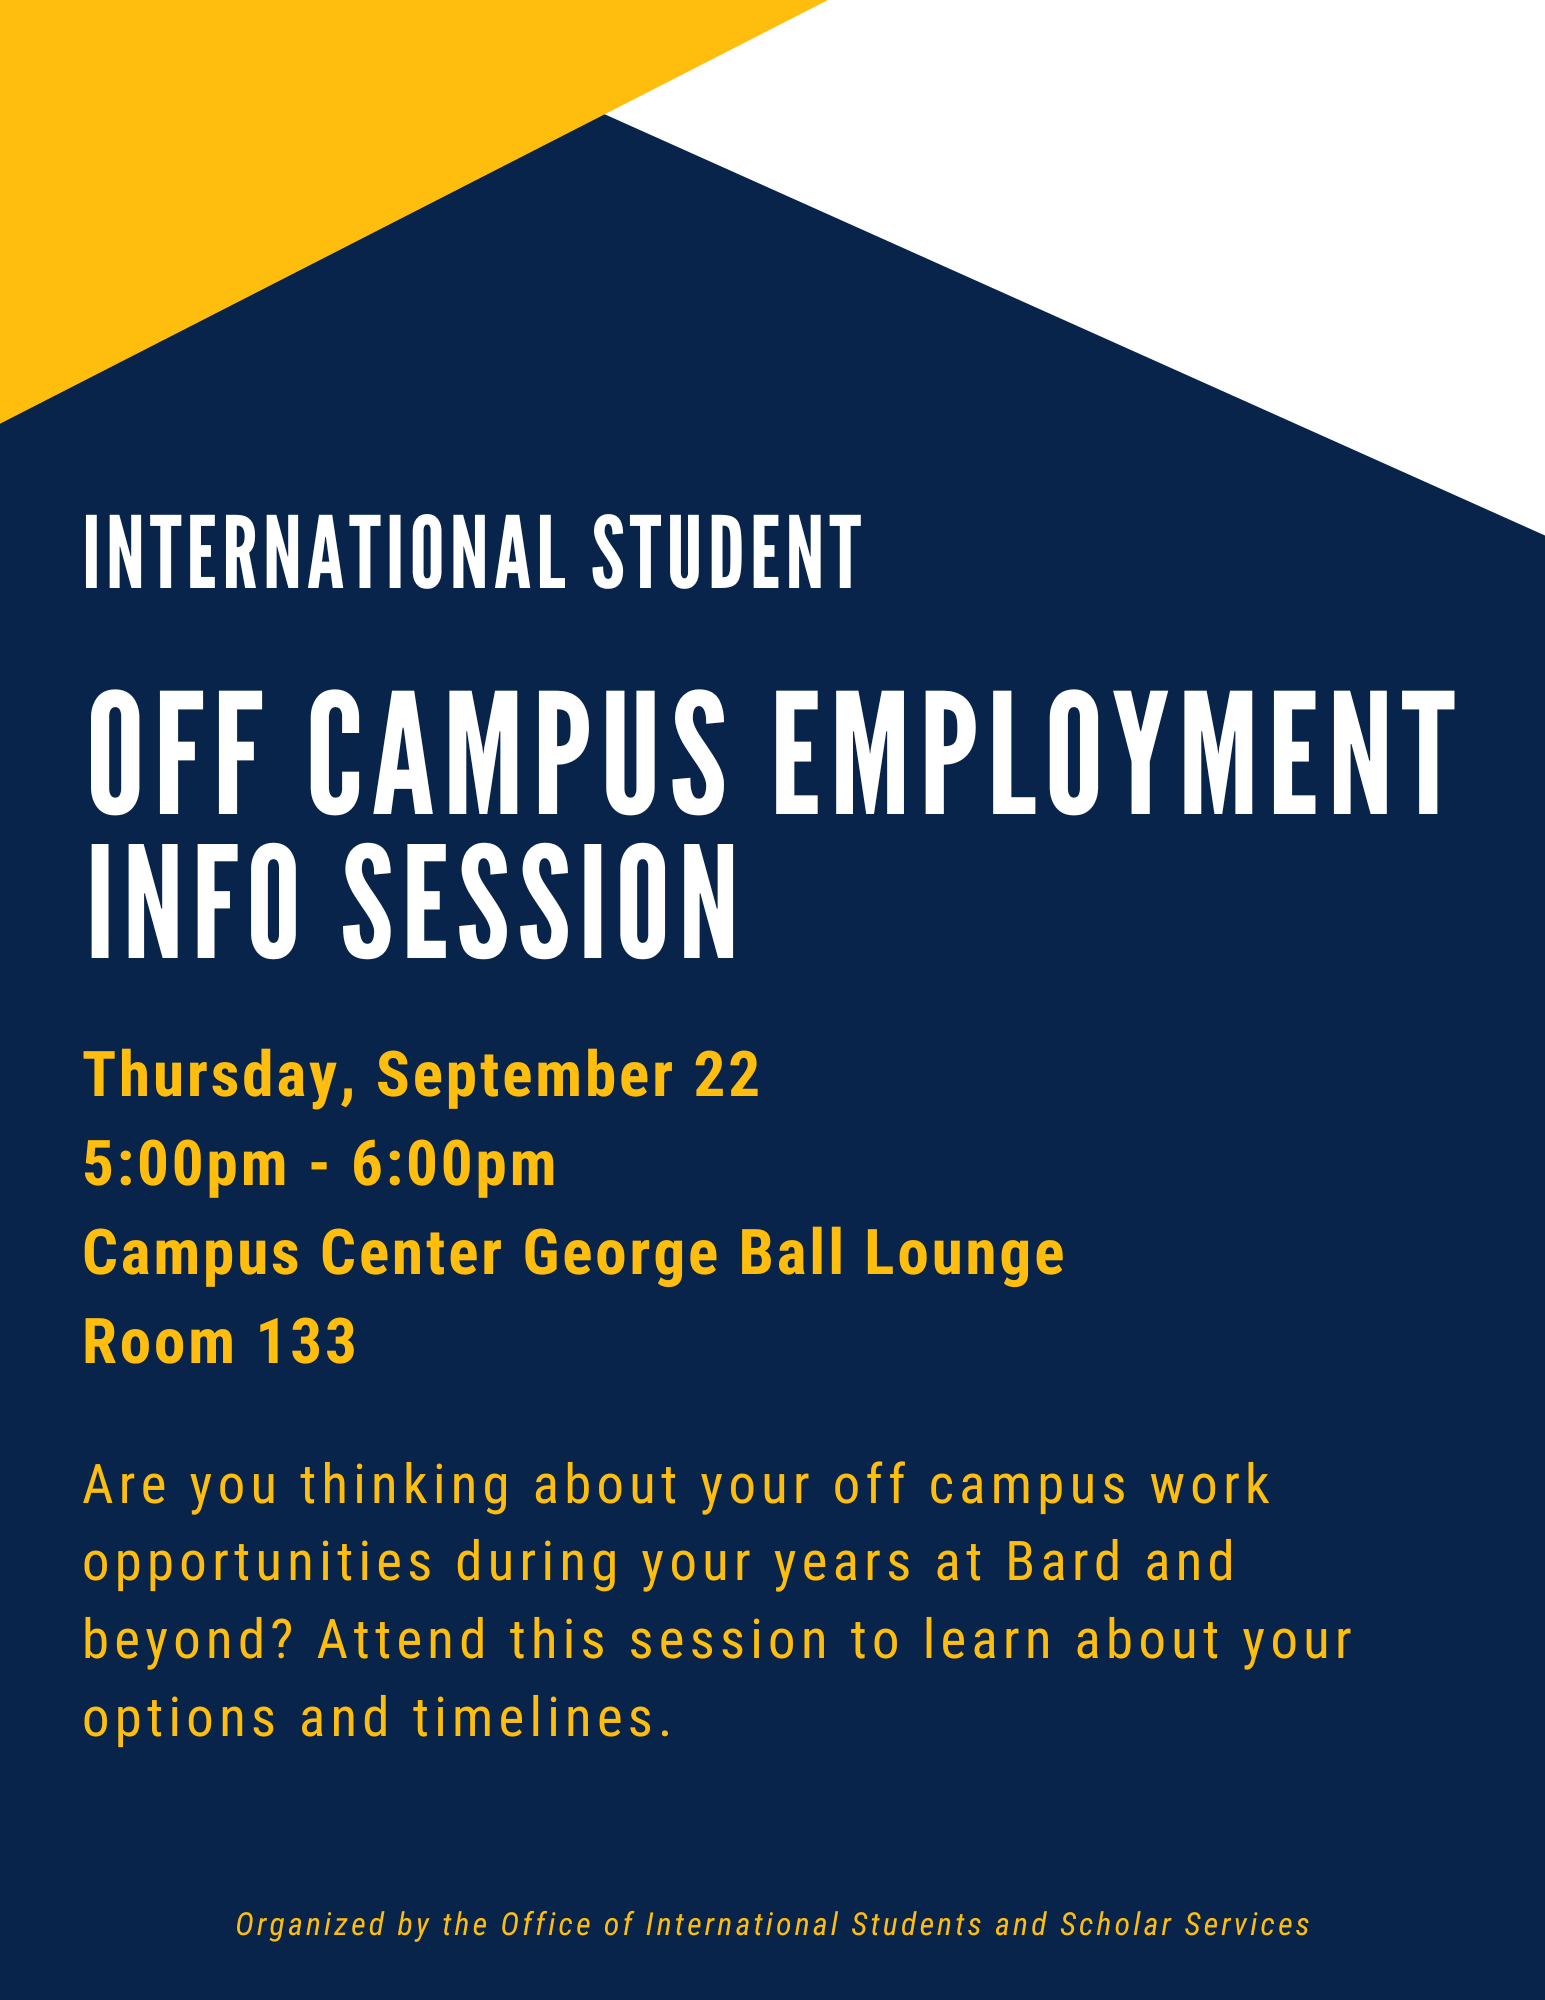 Off-Campus Employment Information Session for International Students